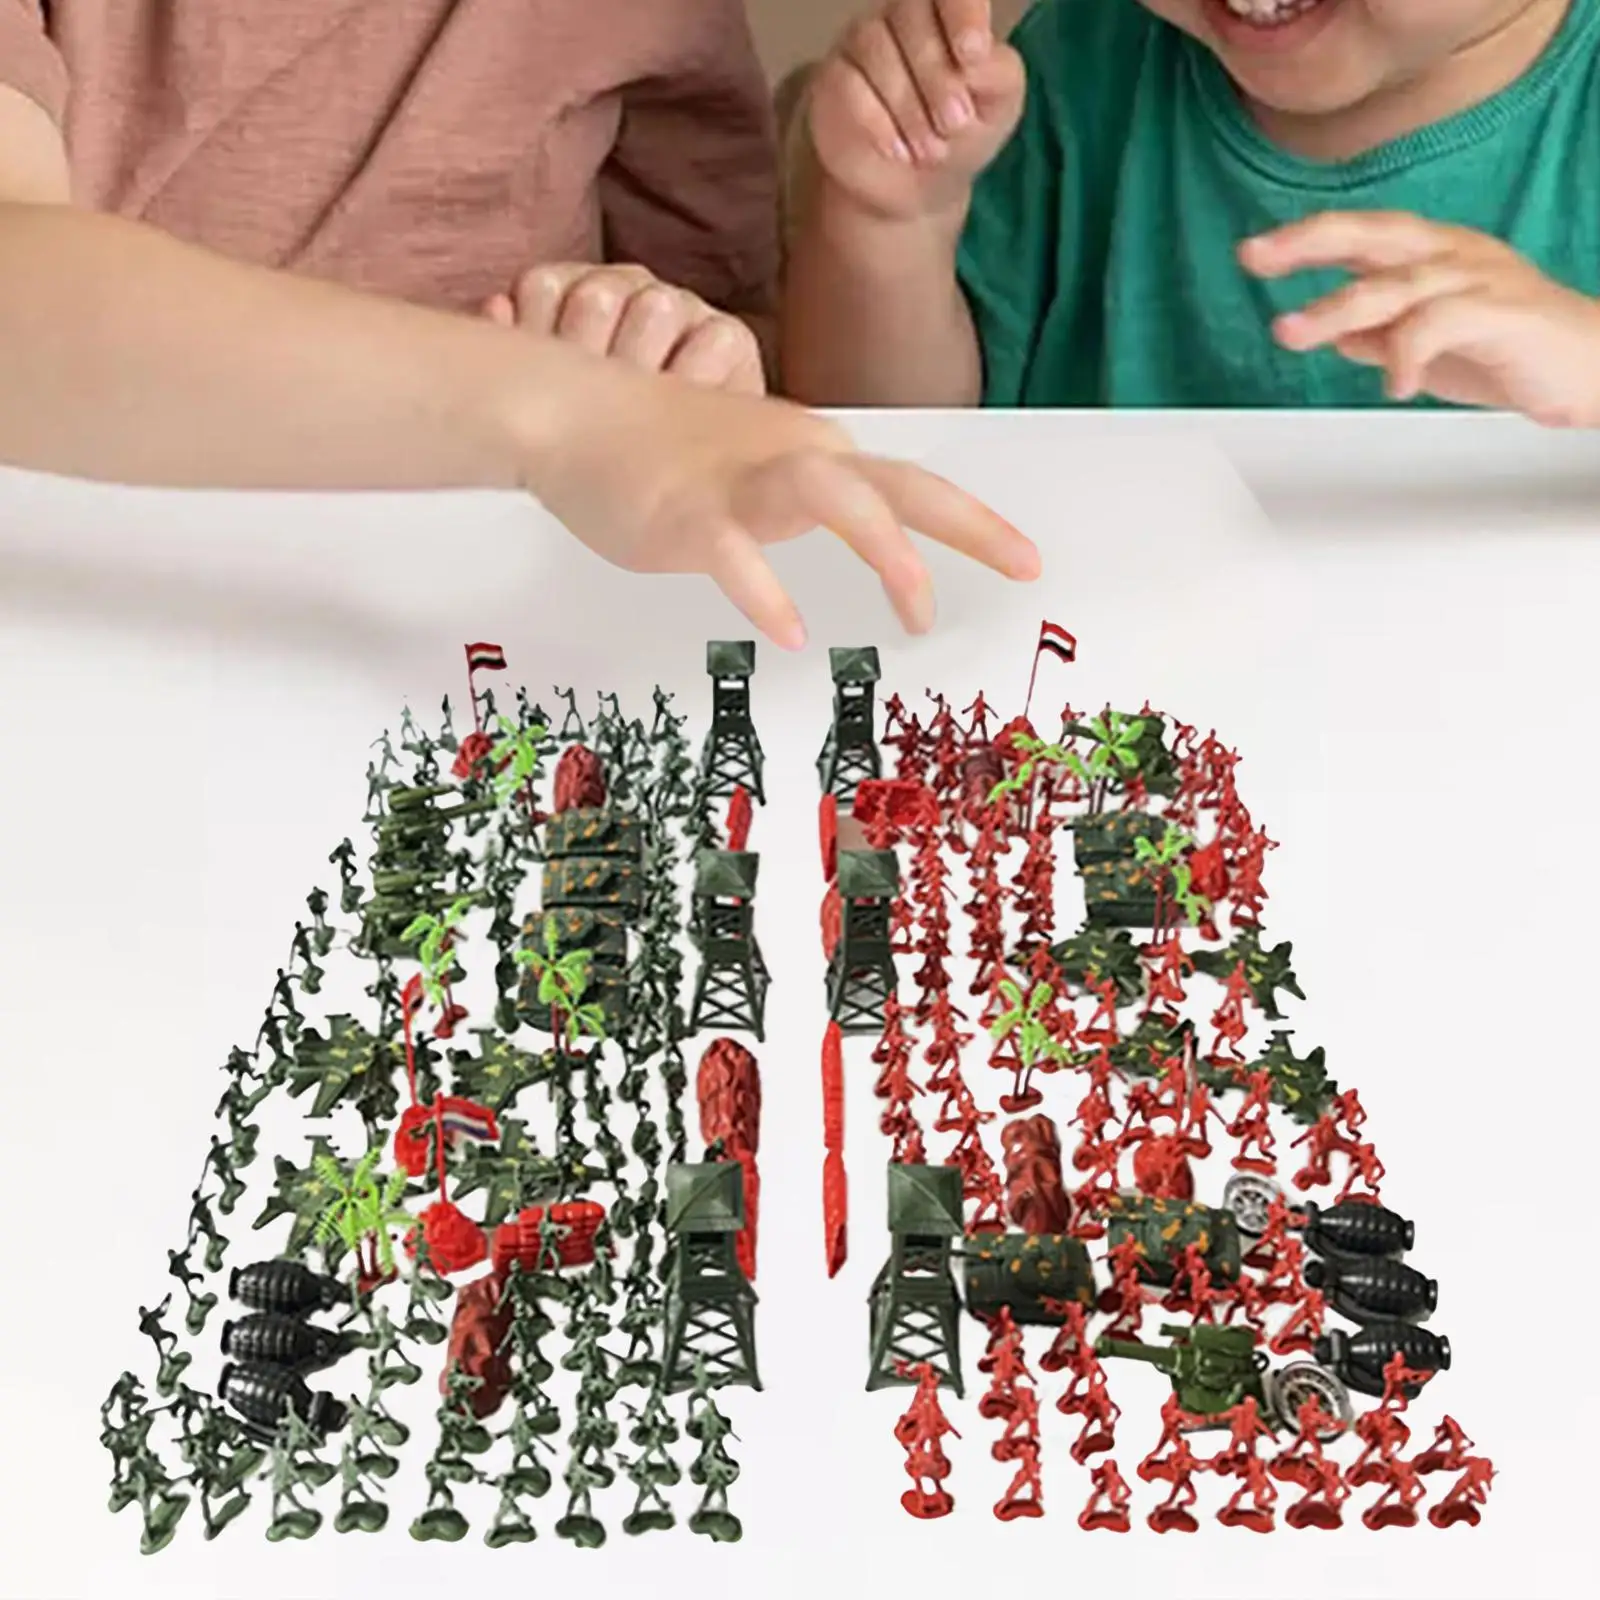 300 Pieces Miniature Soldier Tank Set Decorative 4cm Gifts Multipurpose Collection Toy for Role Playing Layout Props Adults Kids